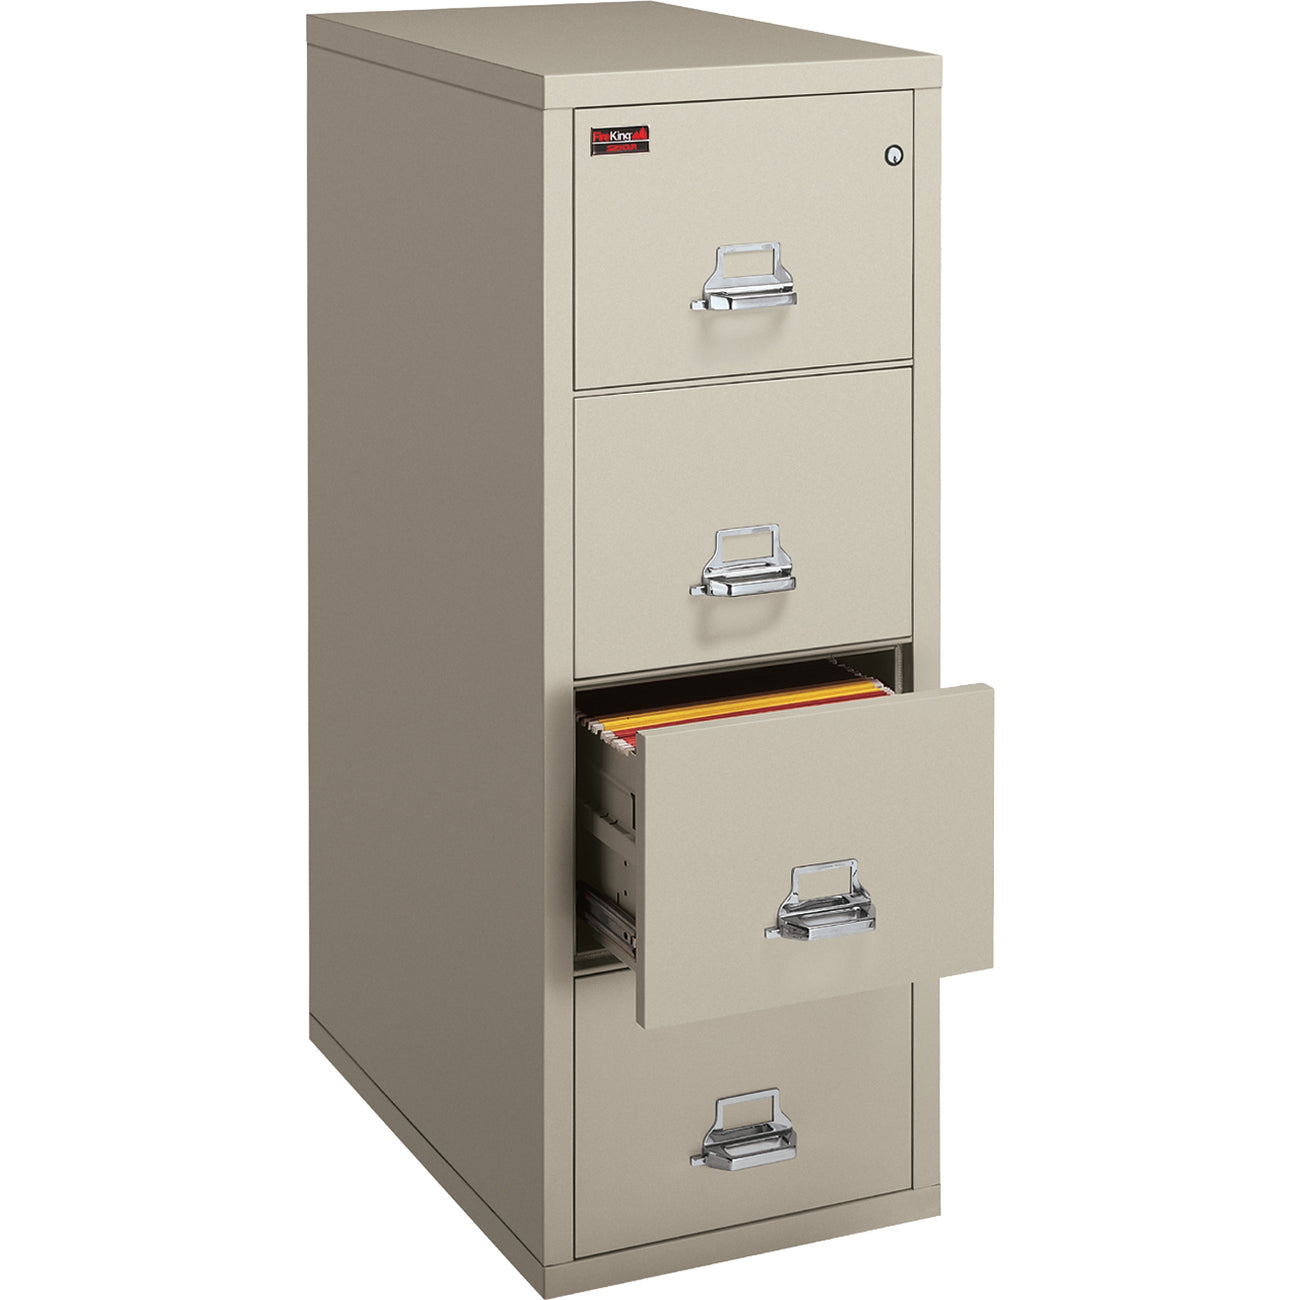 FireKing Fireproof Classic High Security Vertical File Cabinet- 4 Drawer | 4-2131-C |